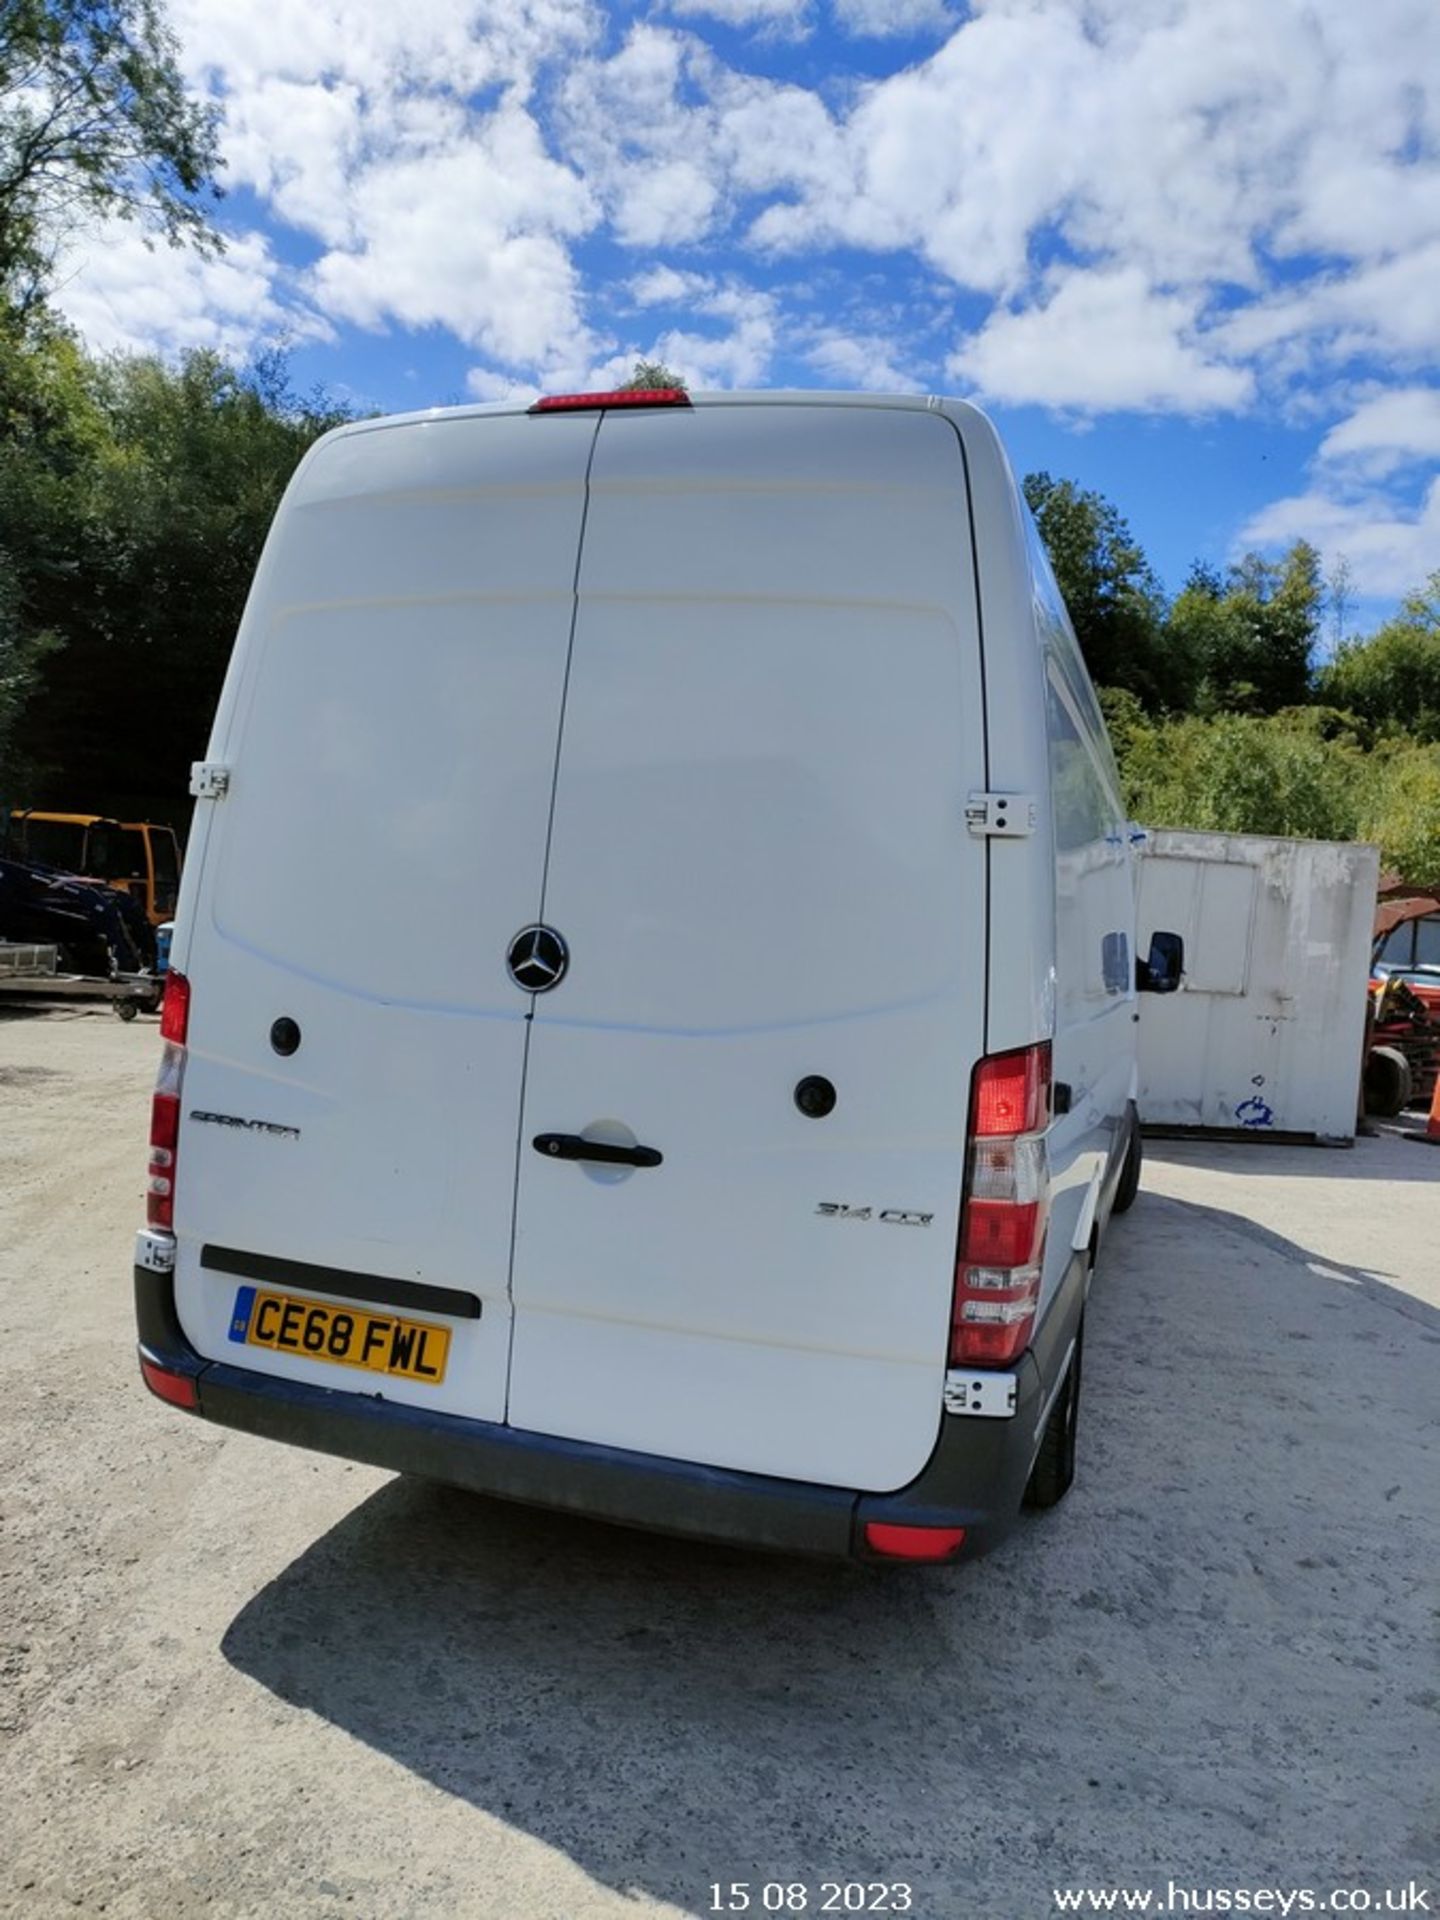 18/68 MERCEDES-BENZ SPRINTER 314CDI - 2143cc 5dr Refrigerated (White) - Image 8 of 40